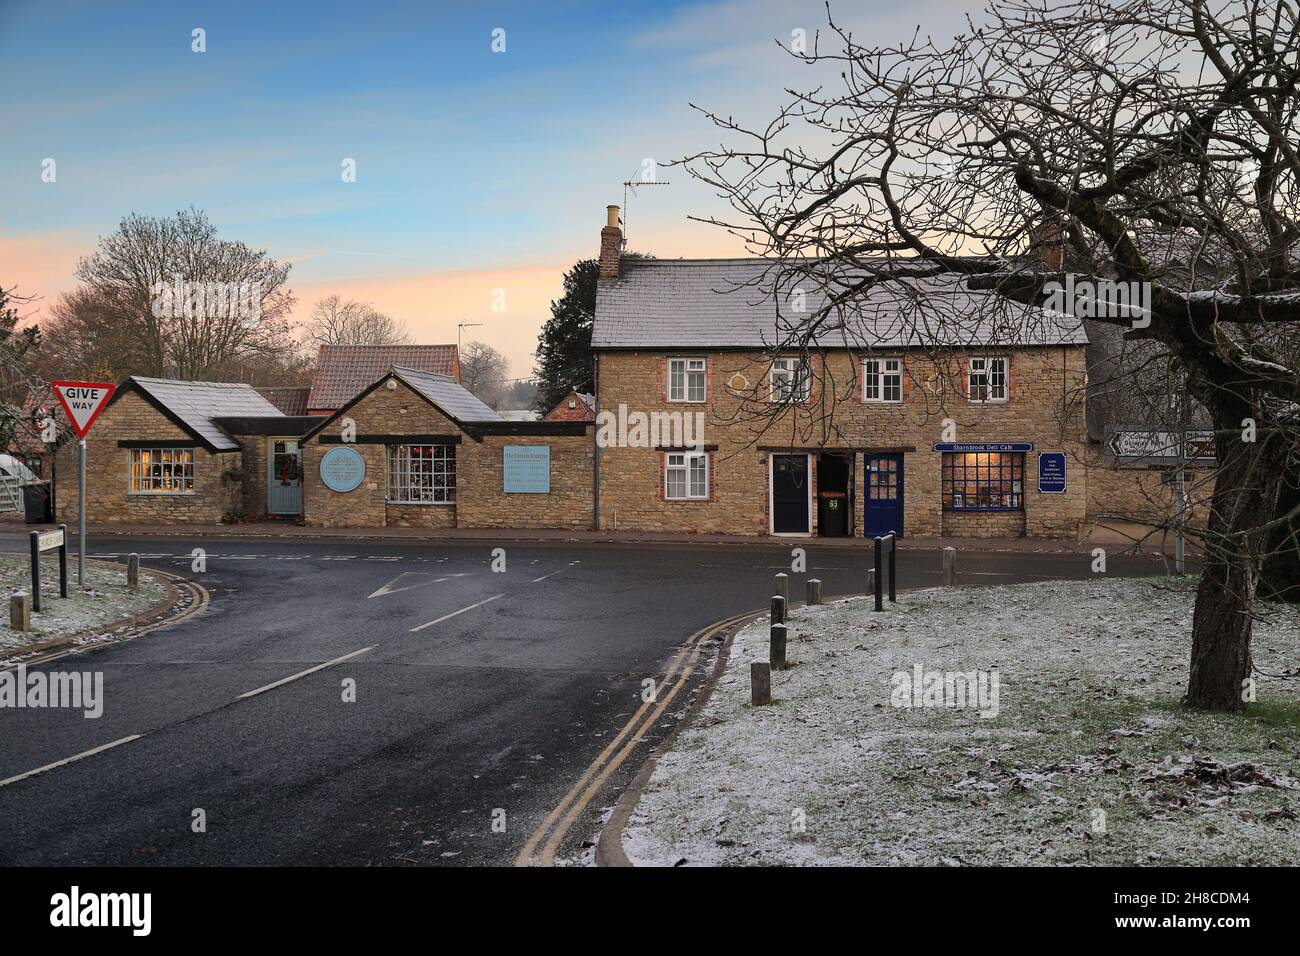 Sharnbrook High Street, Bedfordshire, England, UK - Winter scene at sunrise of shops and cottages on the village green with frost and snow on roofs Stock Photo